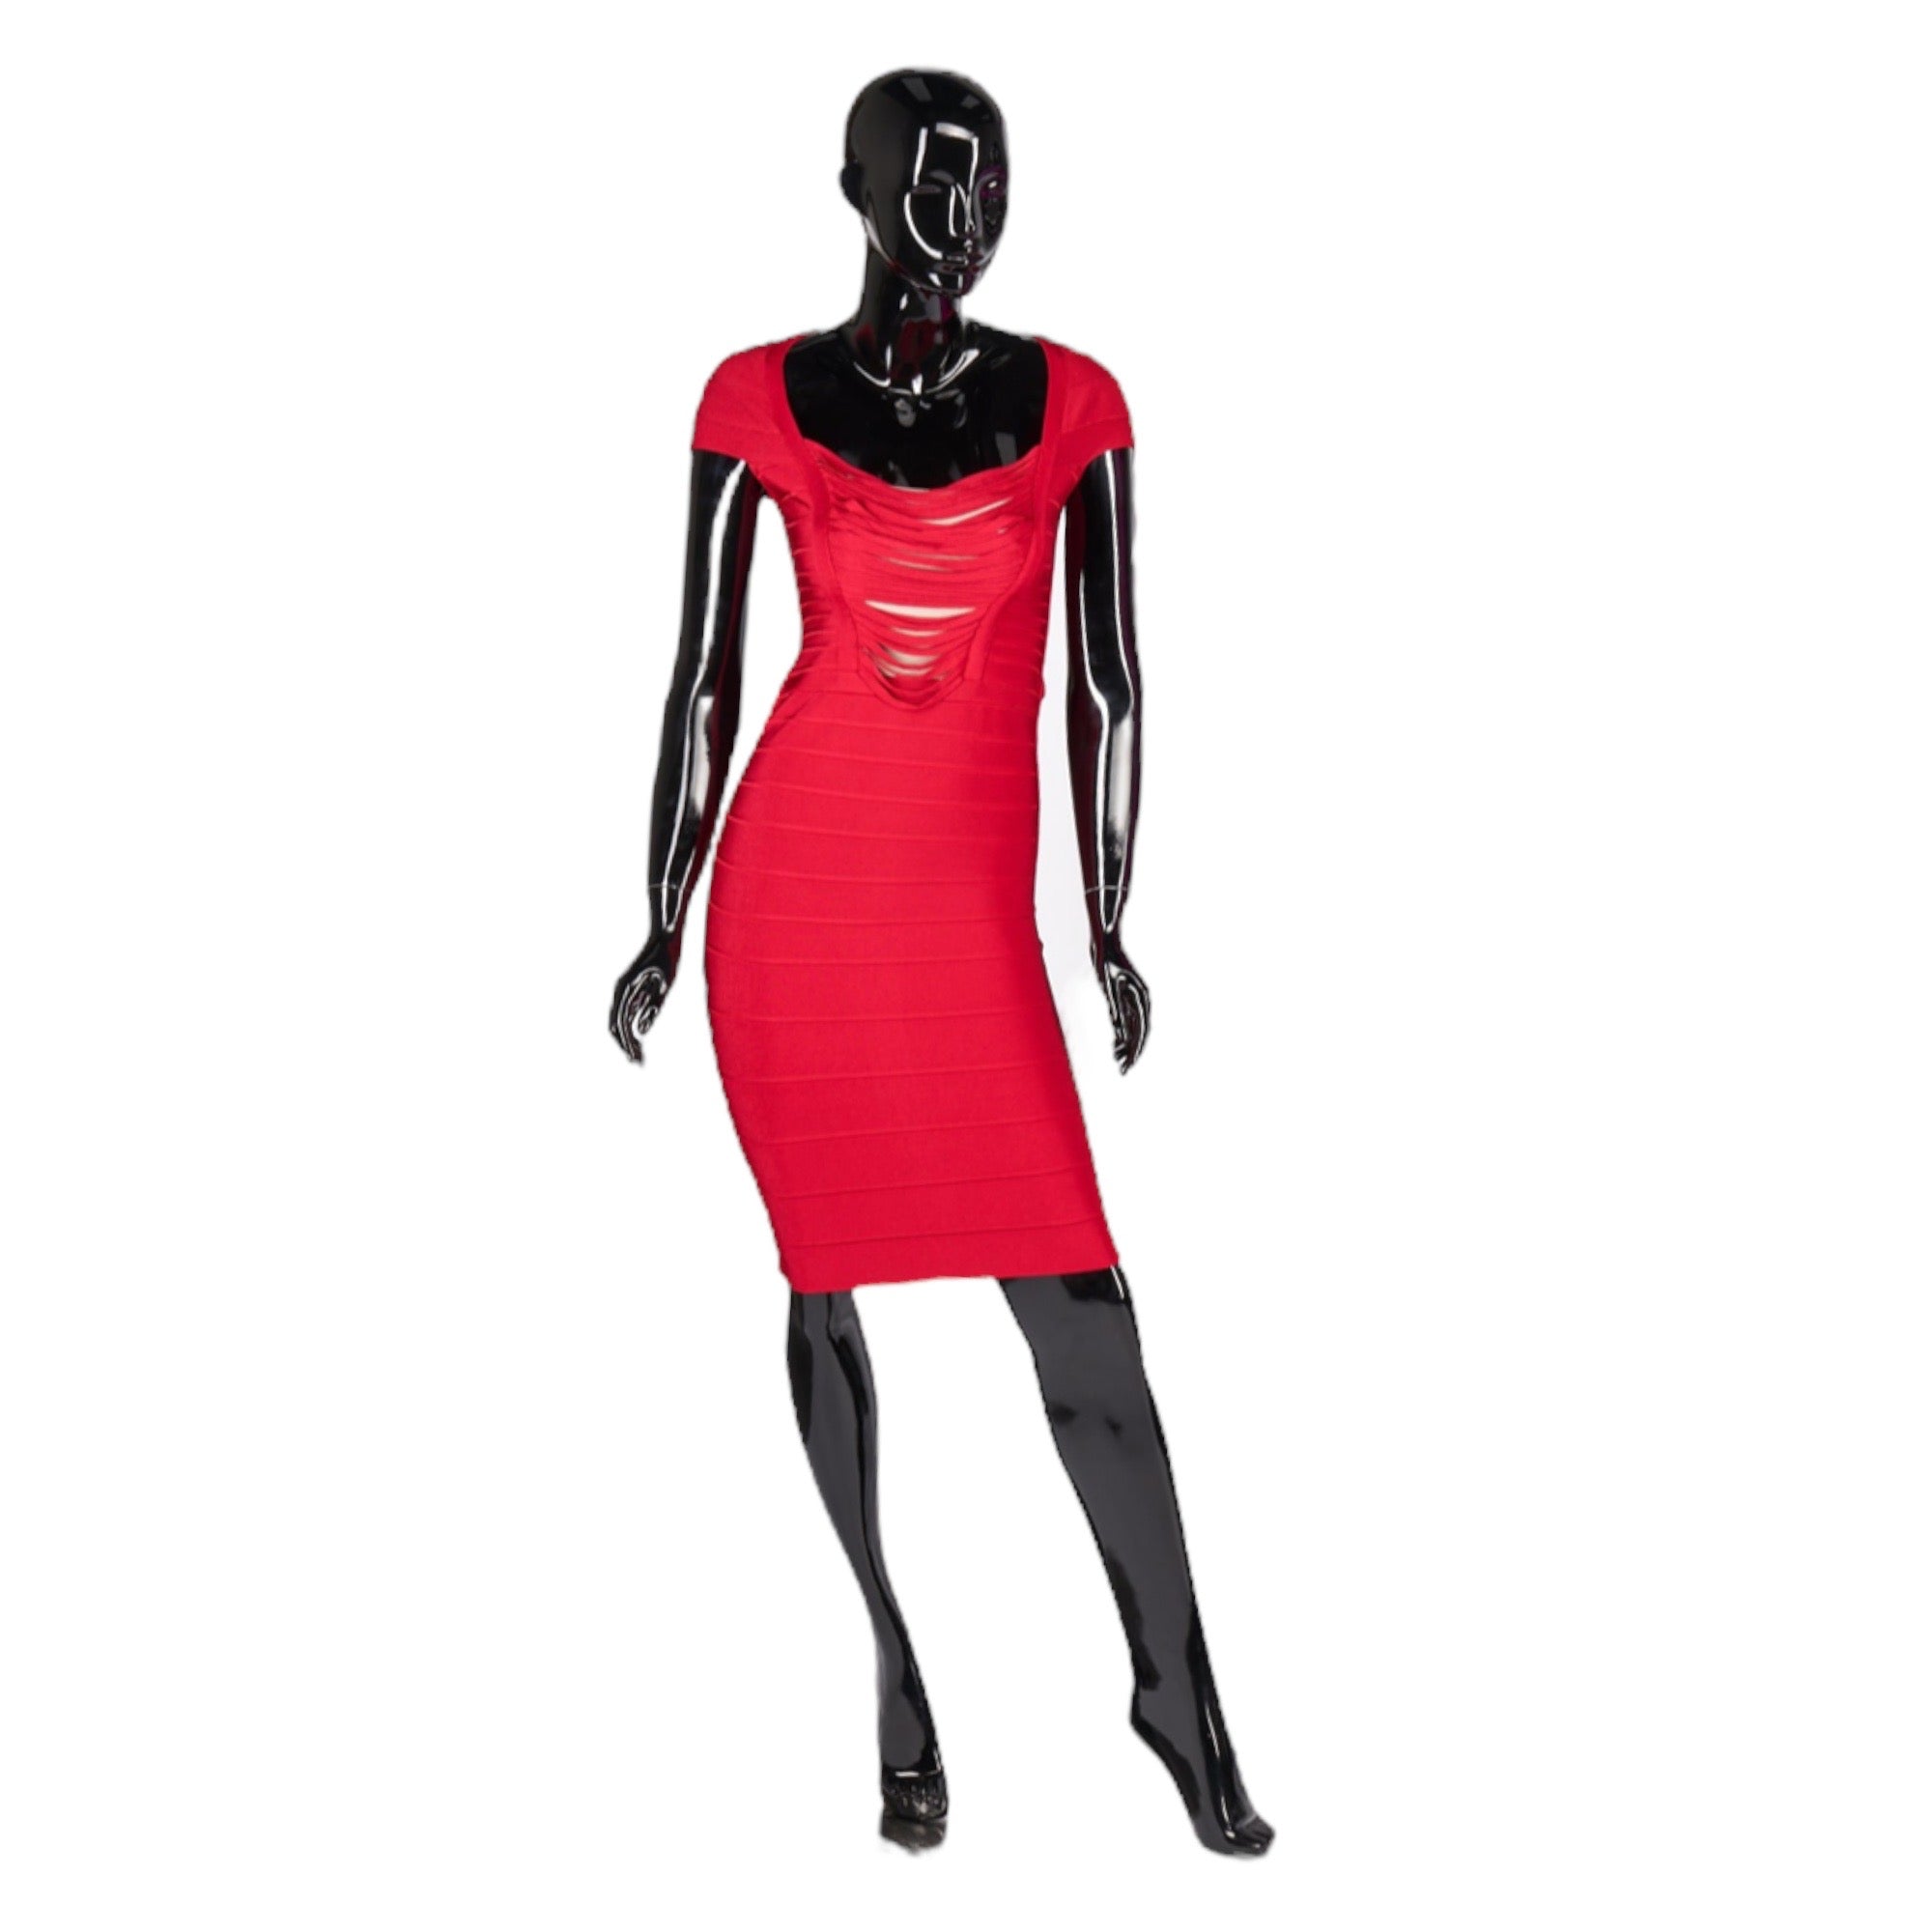 HERVE LEGER "ANNE" Dress in Rouge with Draped Fringe Insert | Size: Small |